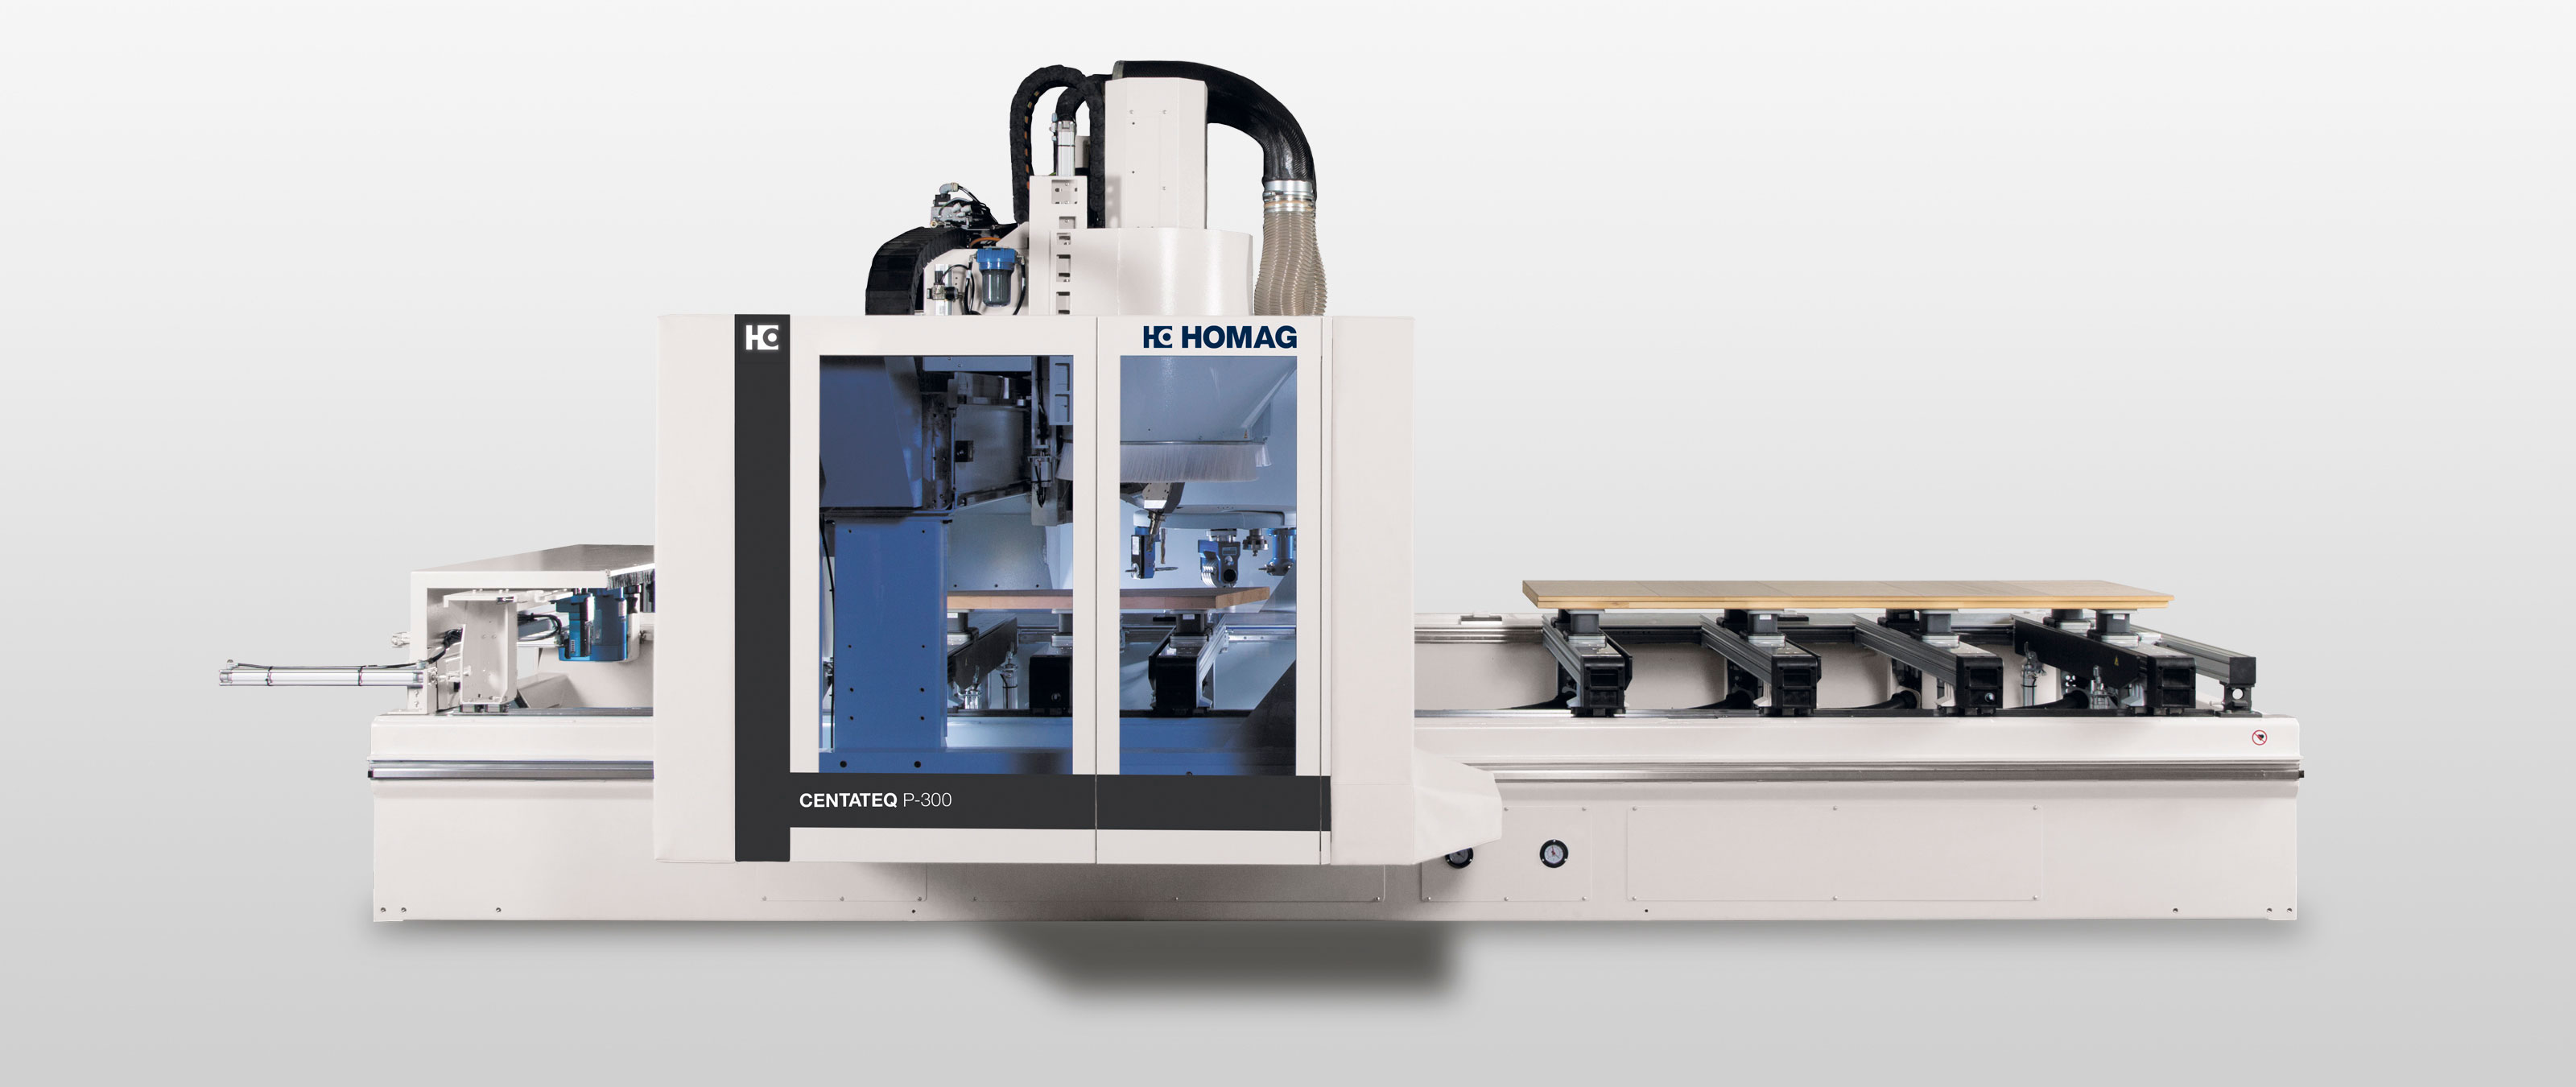 CNC-Processing ccenters Venture CENTATEQ P-300 from HOMAG